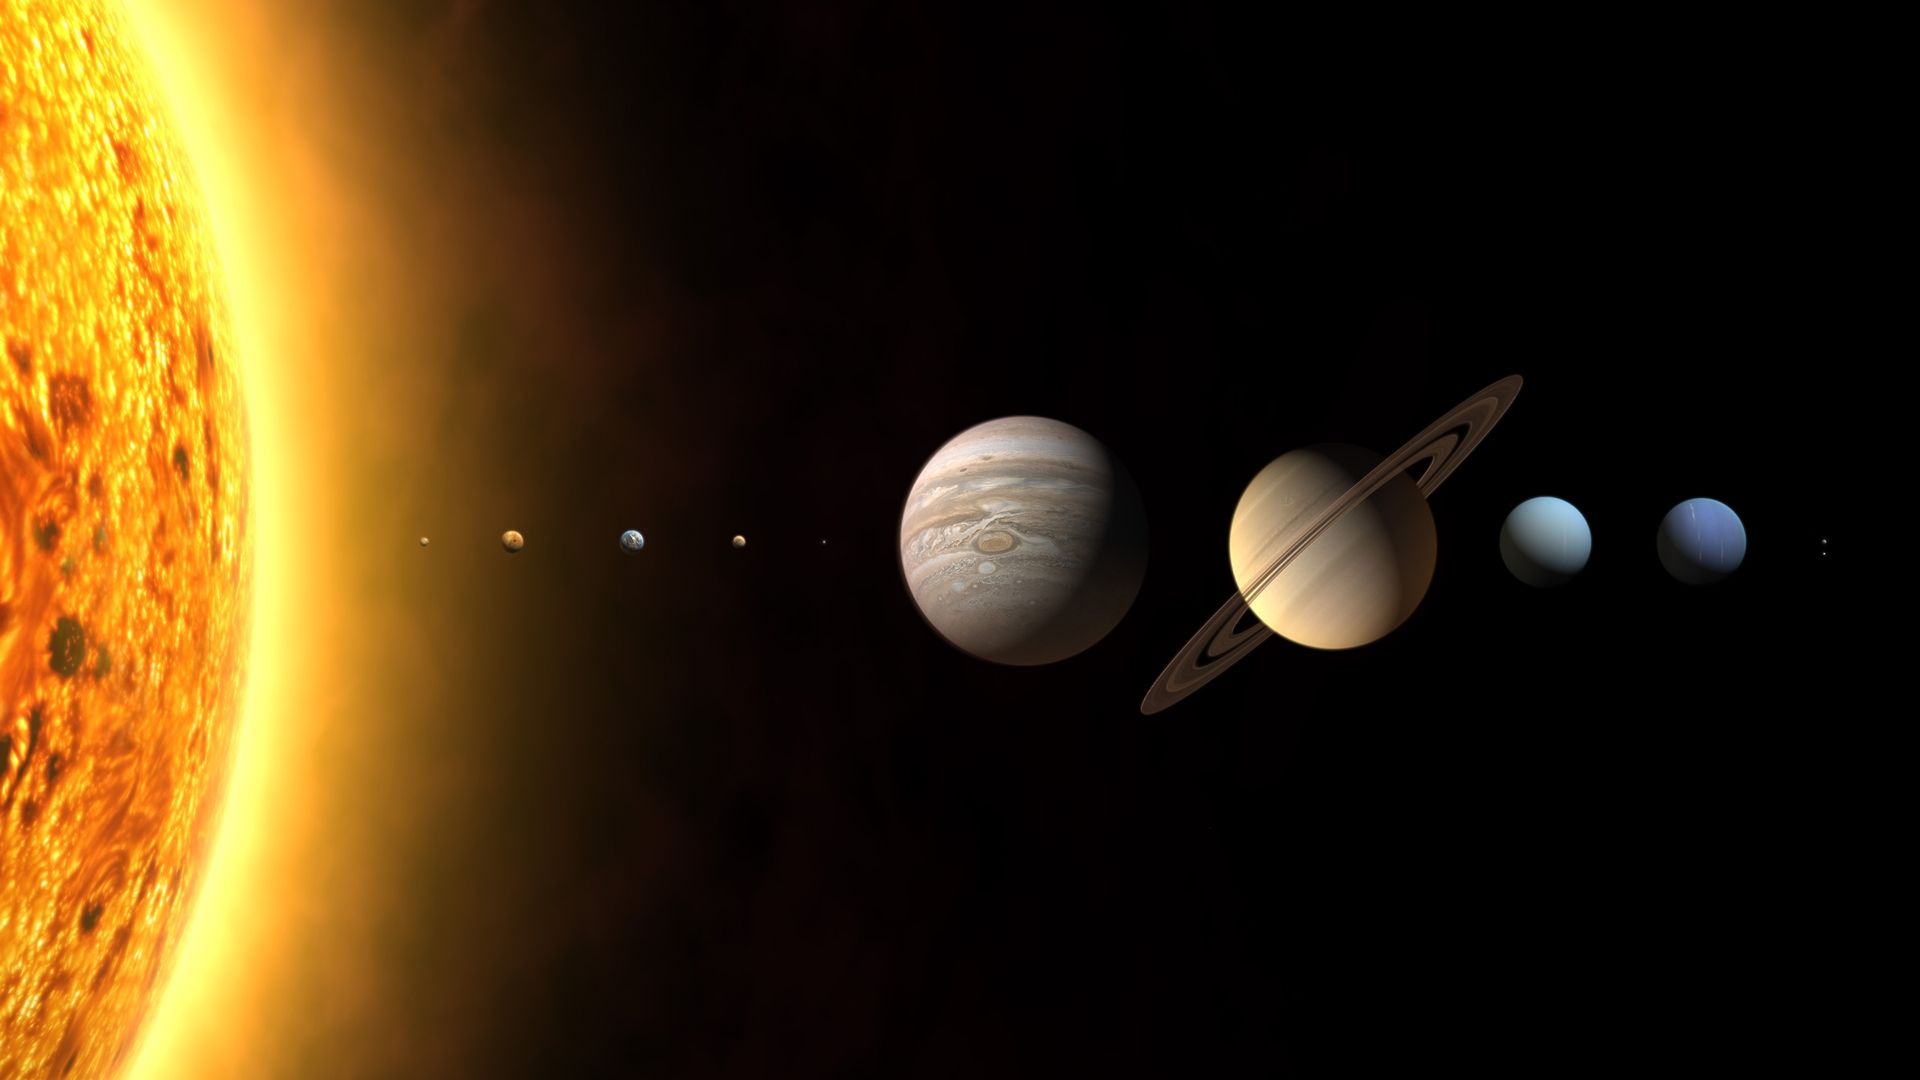 Wonders of the Solar System background